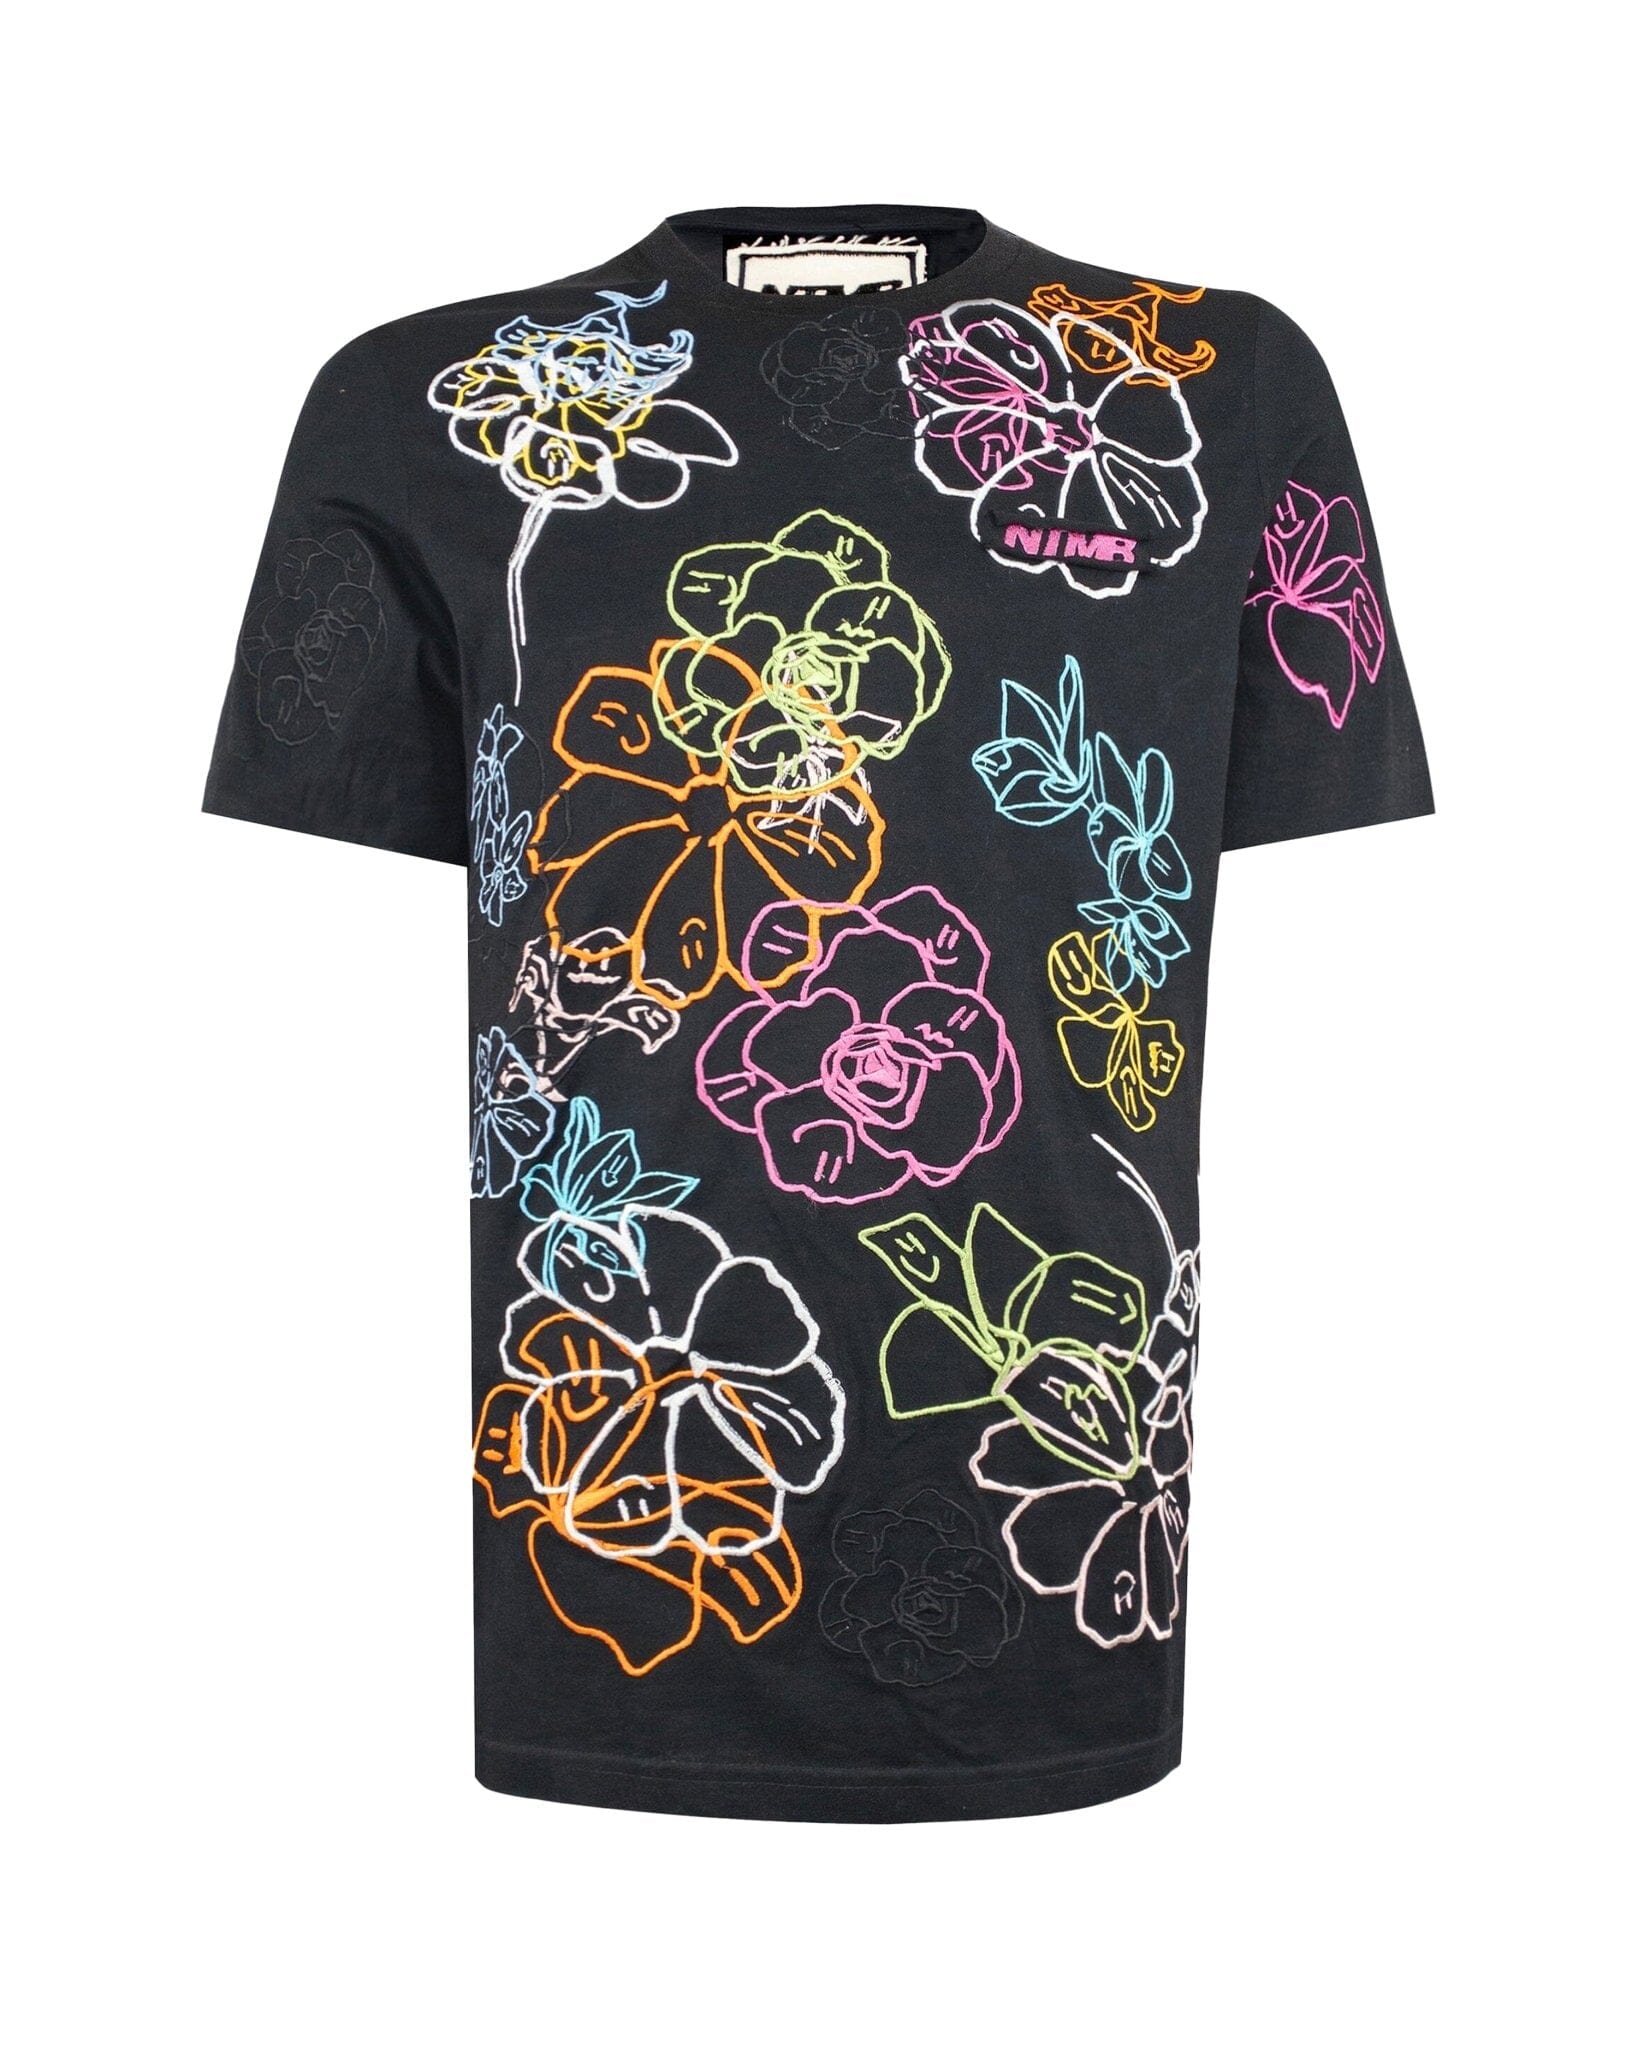 Tee Regular embroidery all over